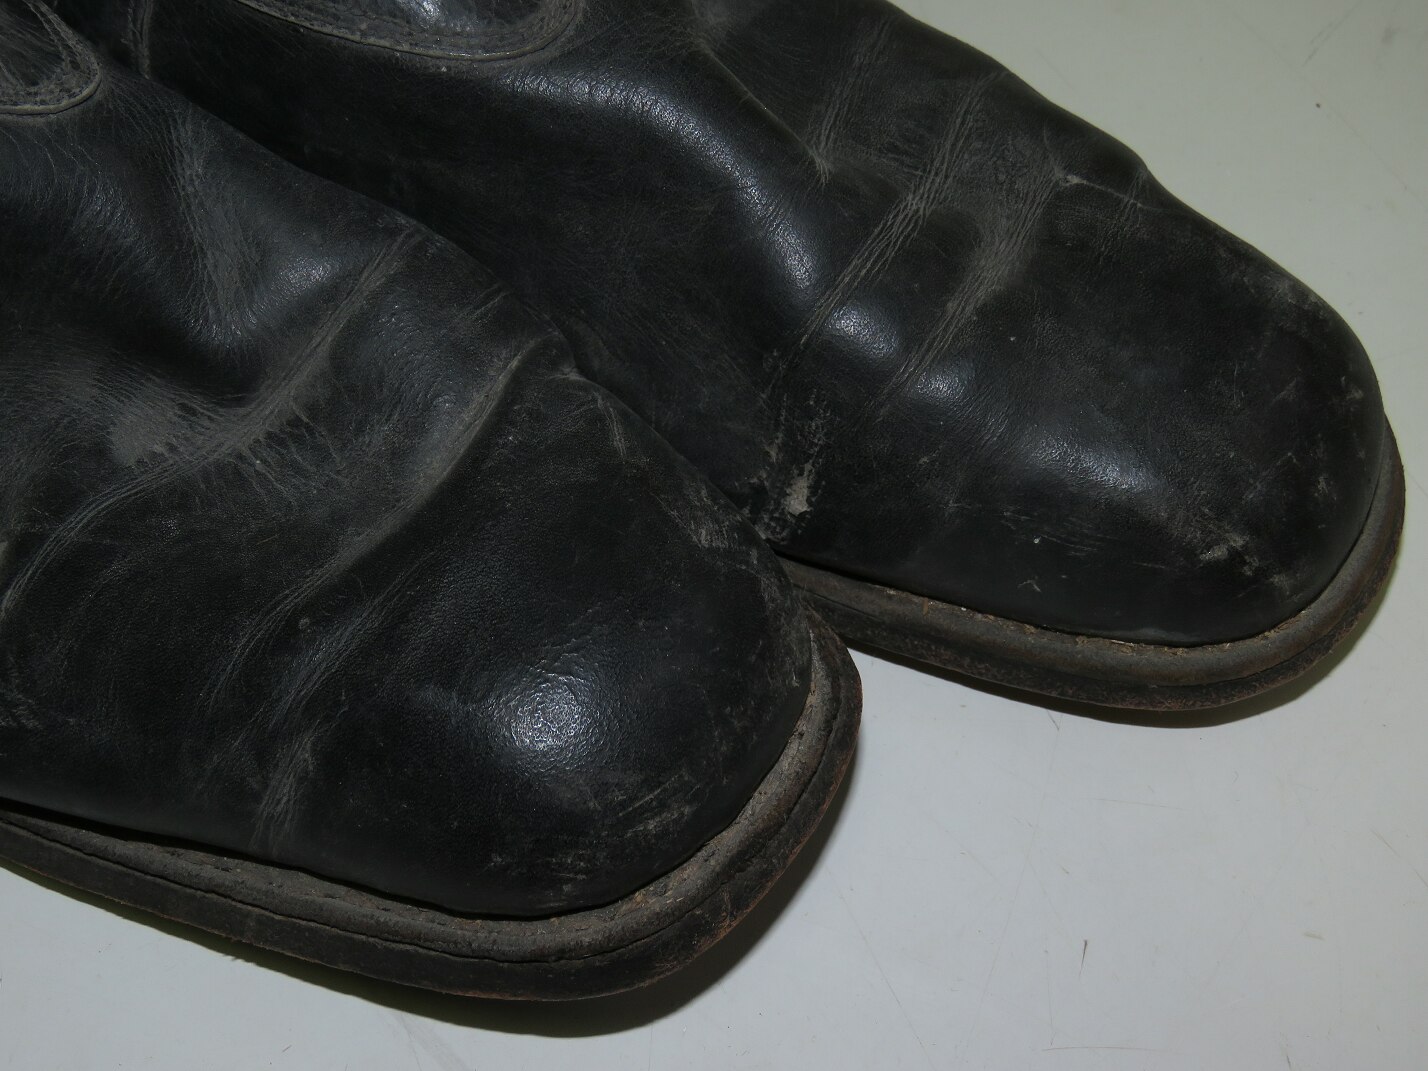 Soviet Russia leather long boots, pre-war. Size 27